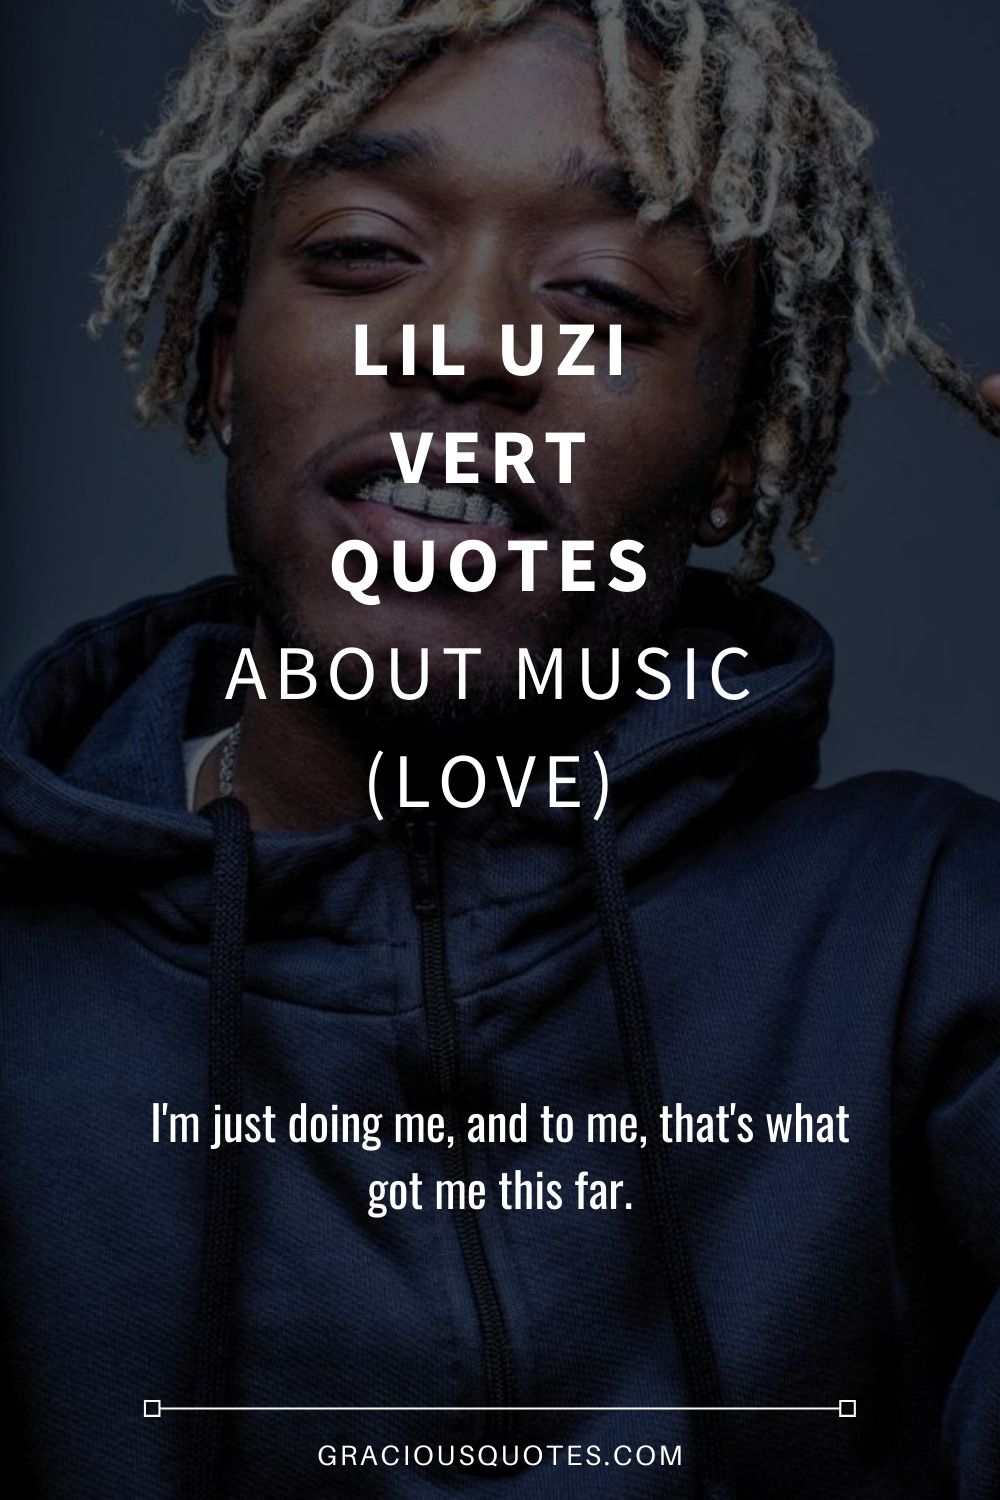 Top 56 Lil Uzi Vert Quotes About Music (LOVE)